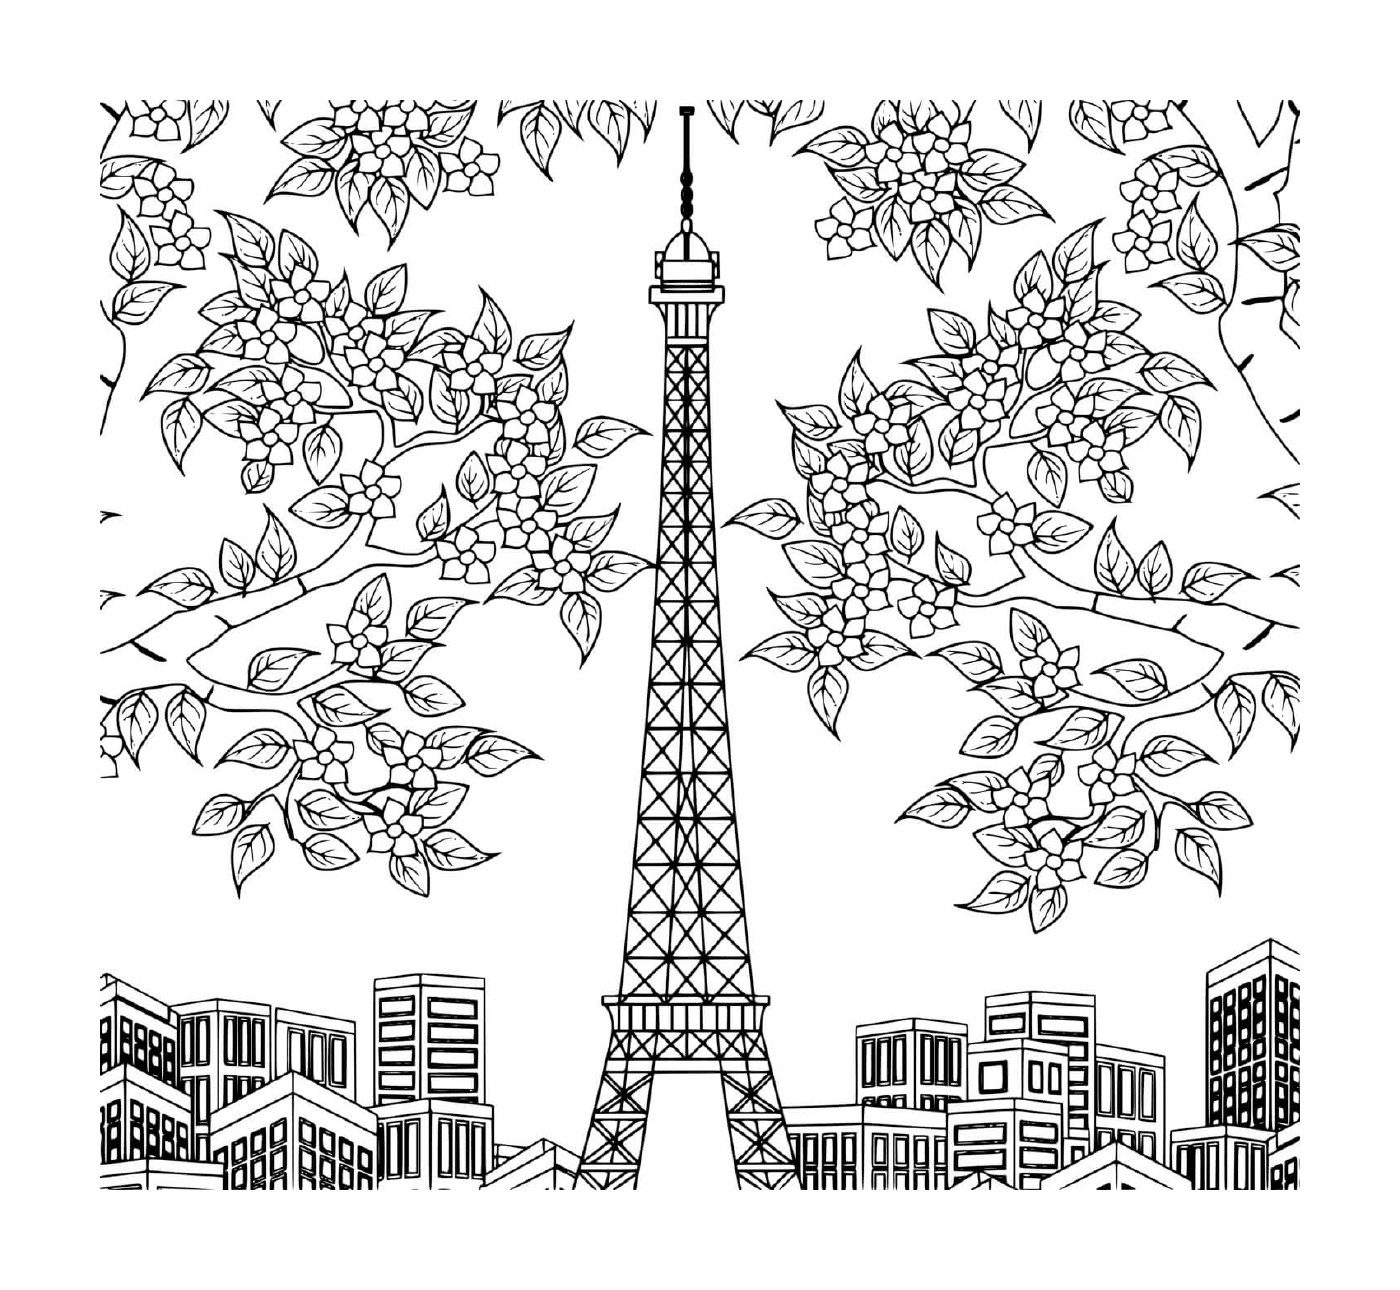  Eiffel Tower surrounded by trees, flowers and buildings 